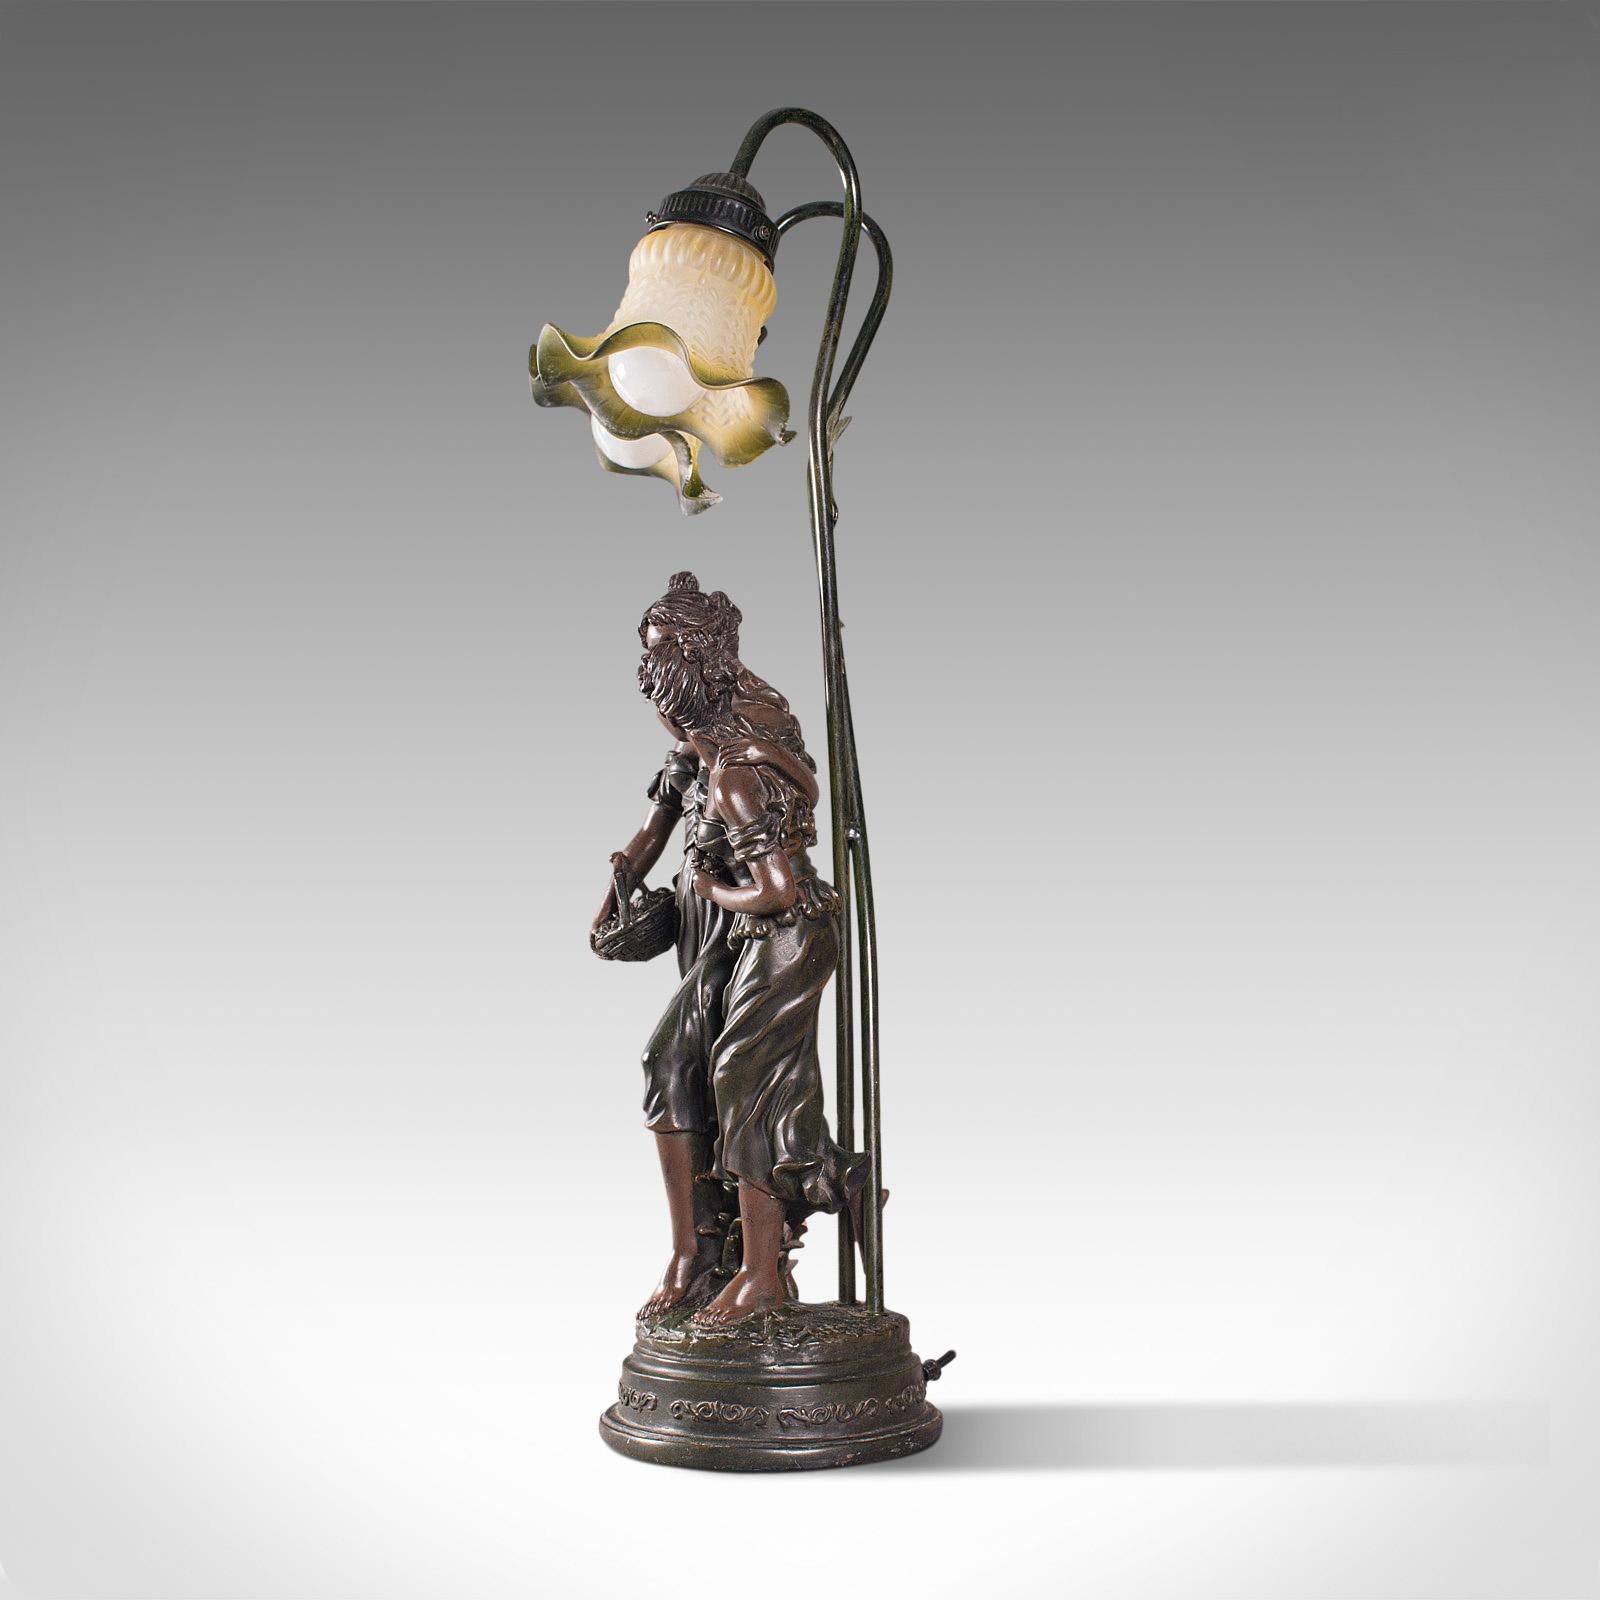 20th Century Vintage Decorative Lamp, French, Spelter Bronze, Female, Figures, Table Light